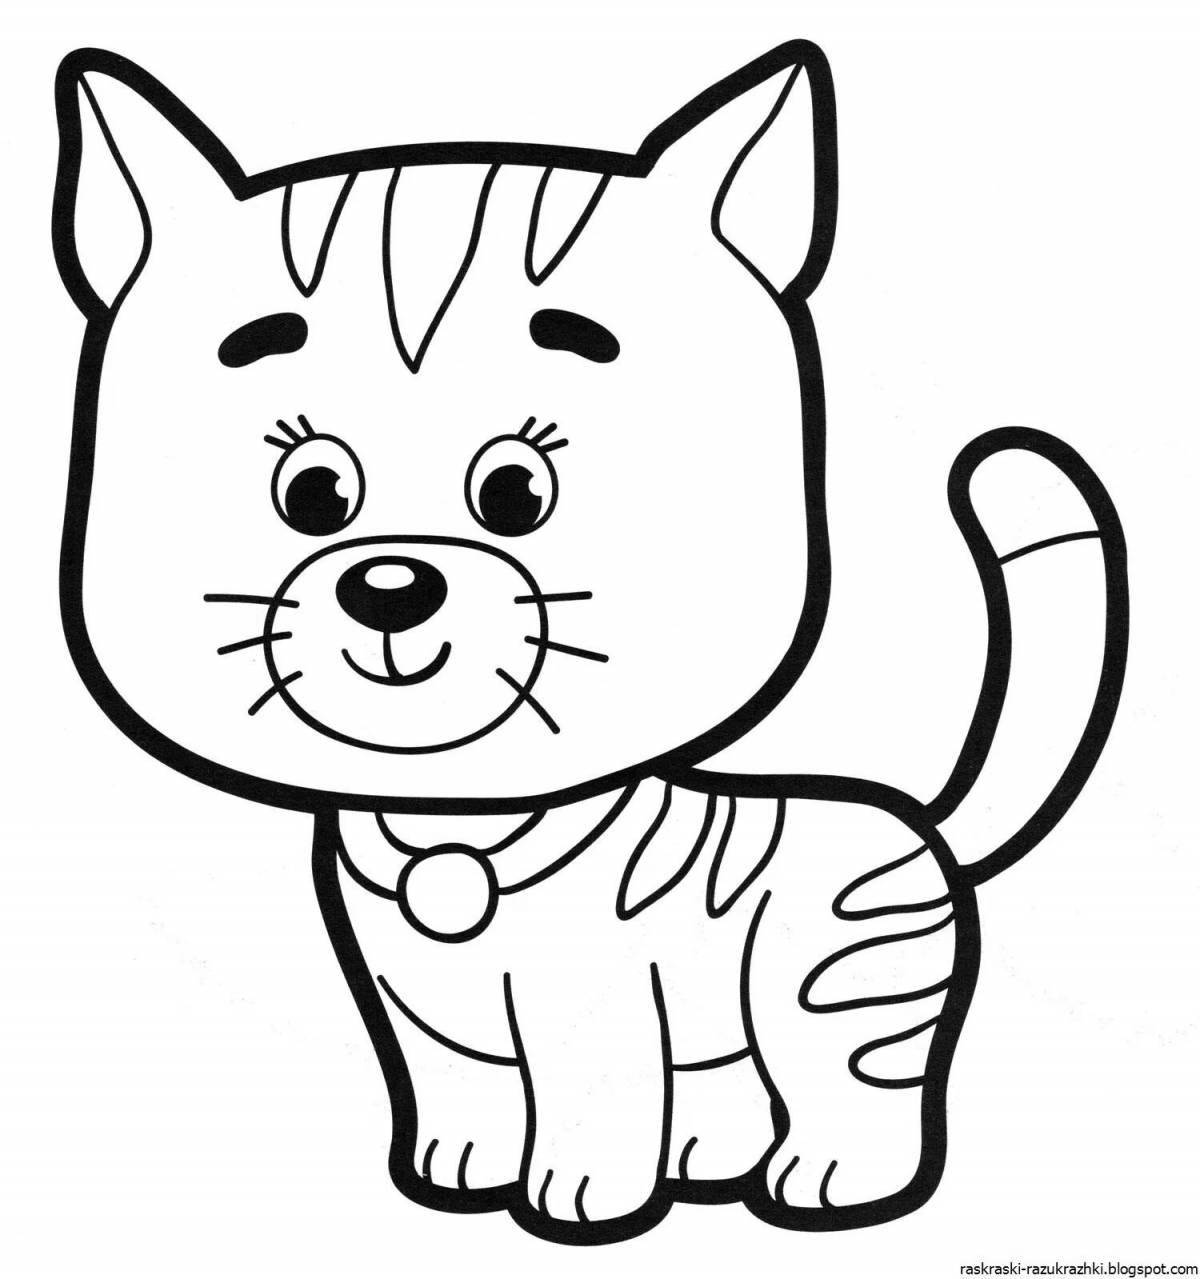 Witty cat coloring page for kids